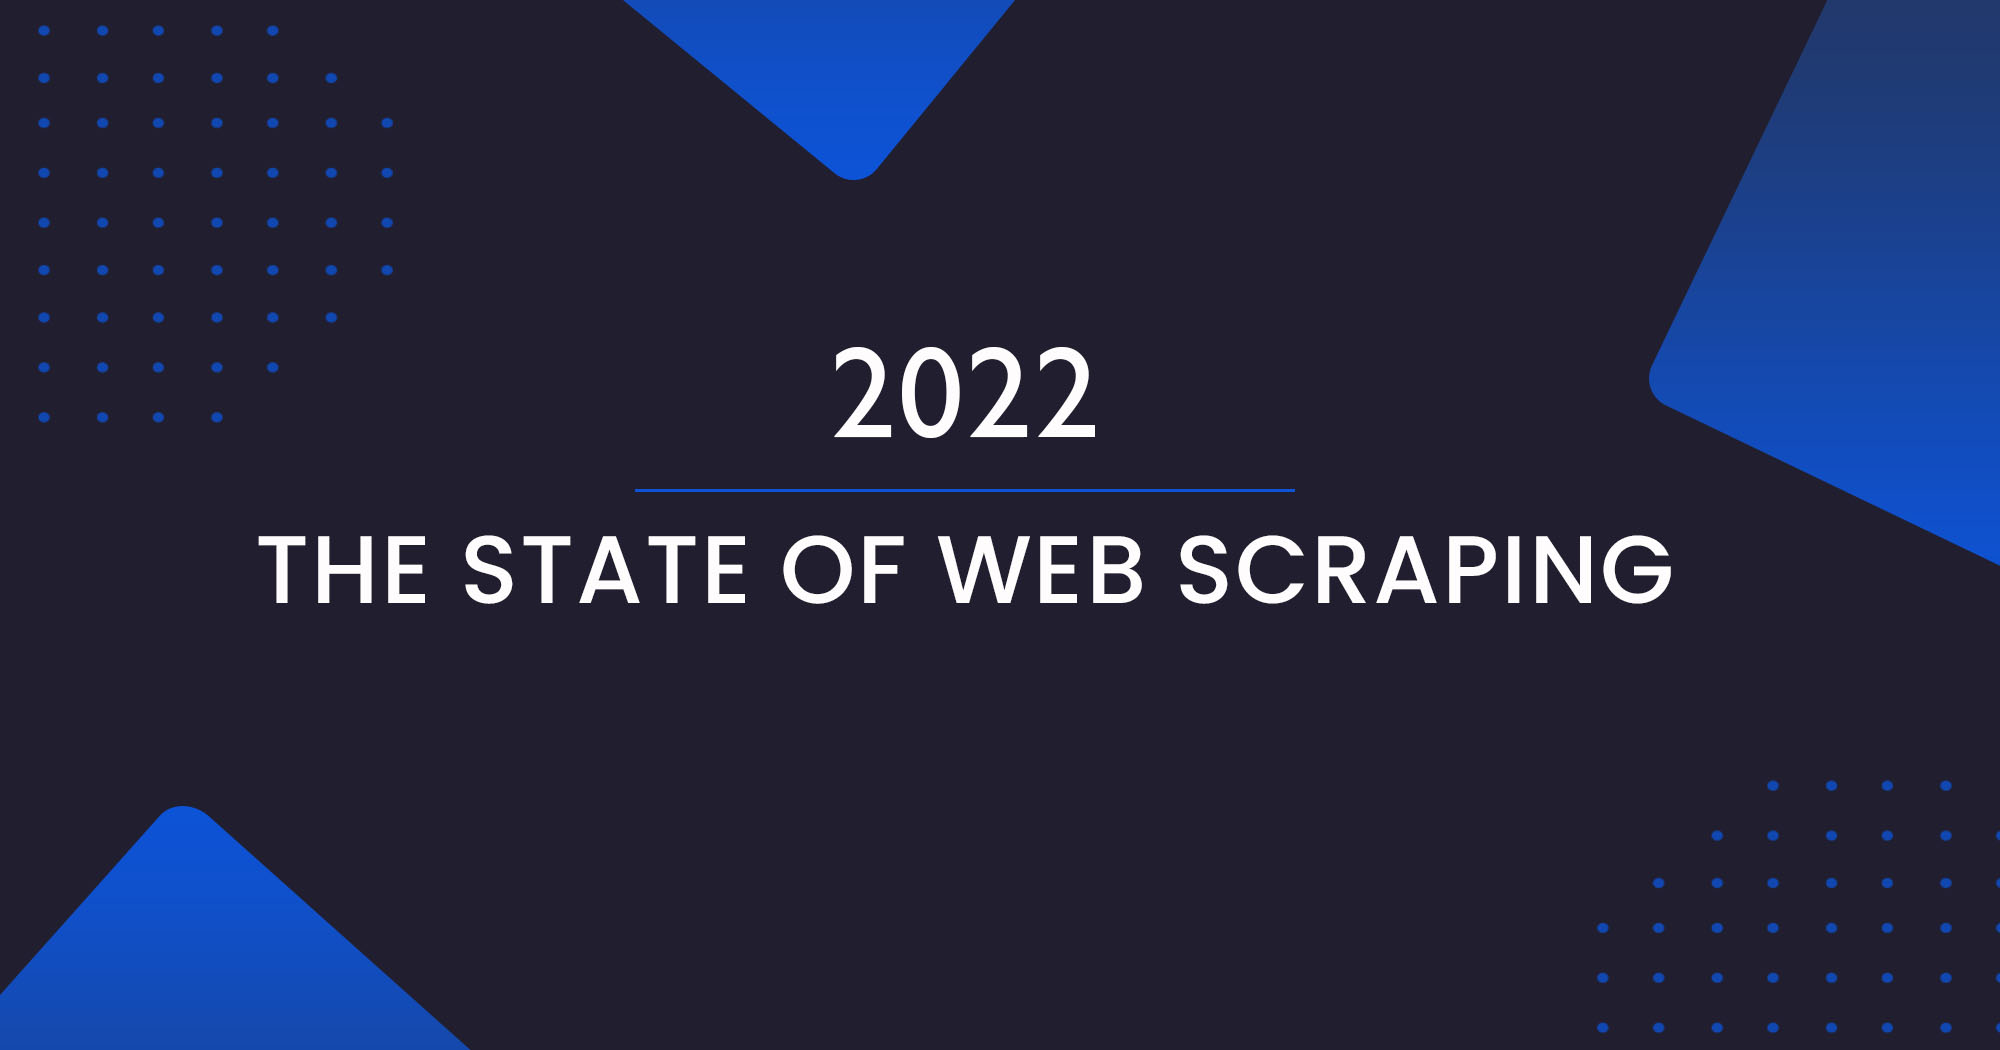 The State of Web Scraping 2022